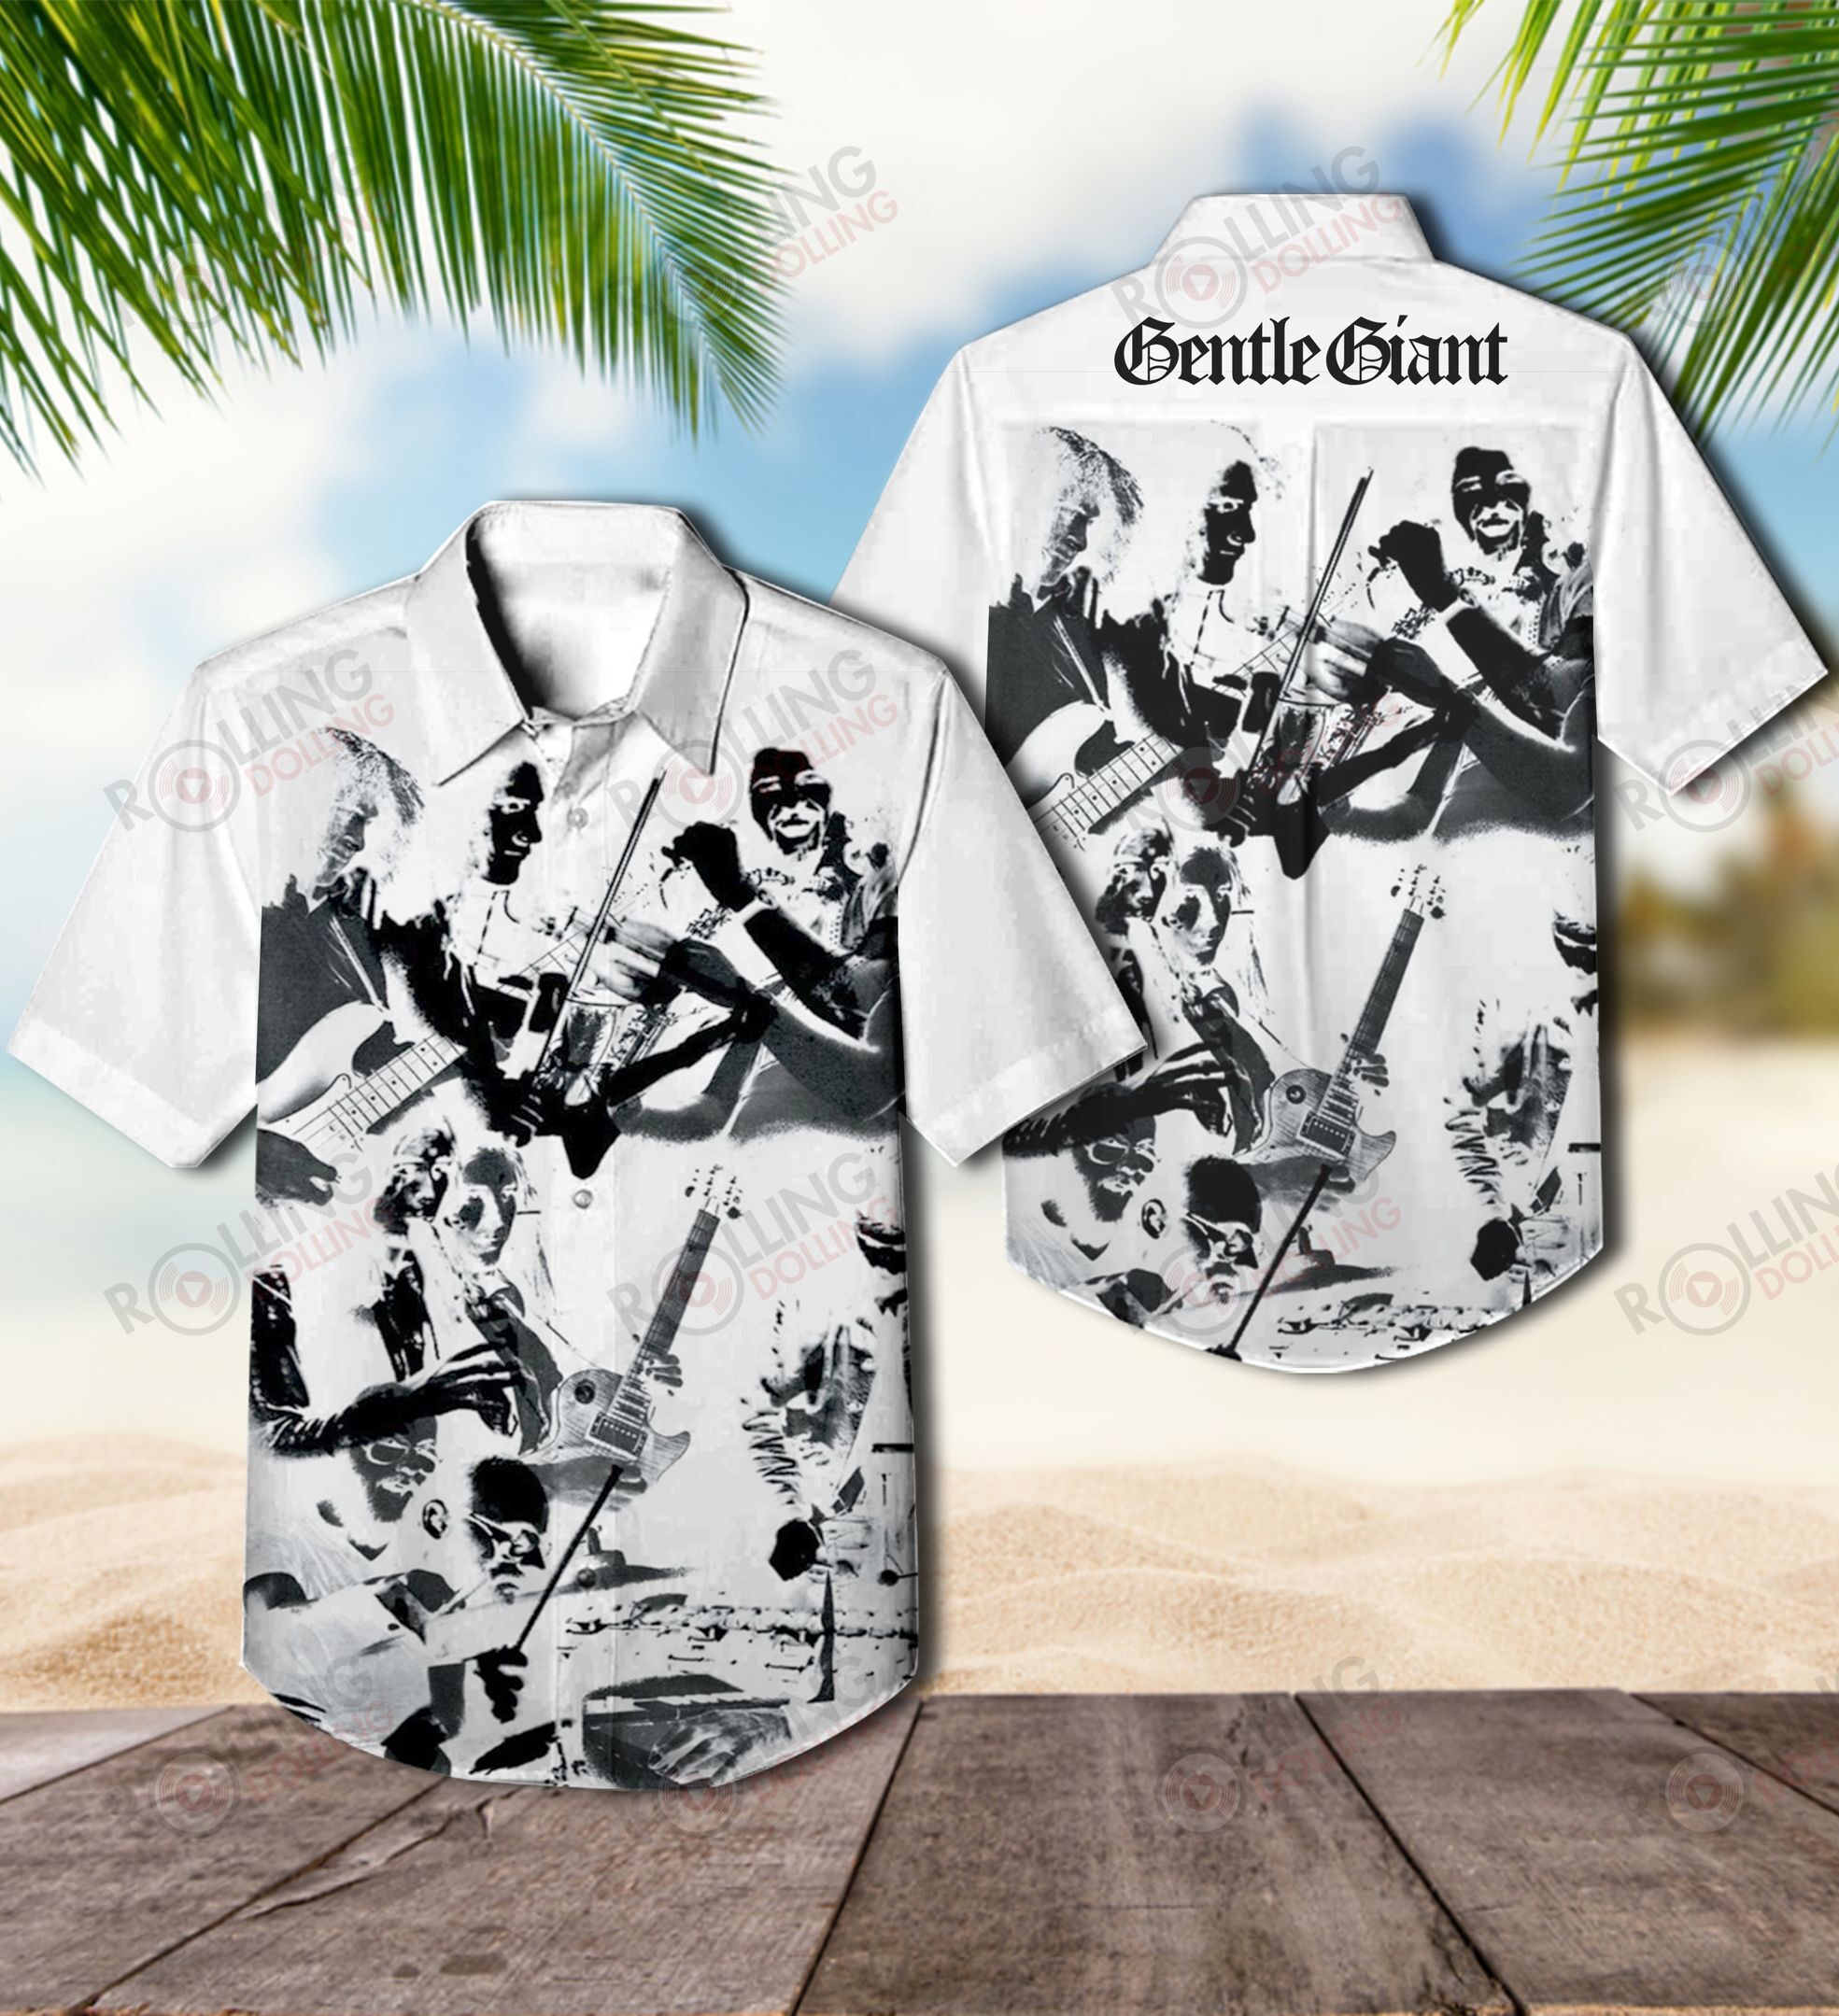 This would make a great gift for any fan who loves Hawaiian Shirt as well as Rock band 100